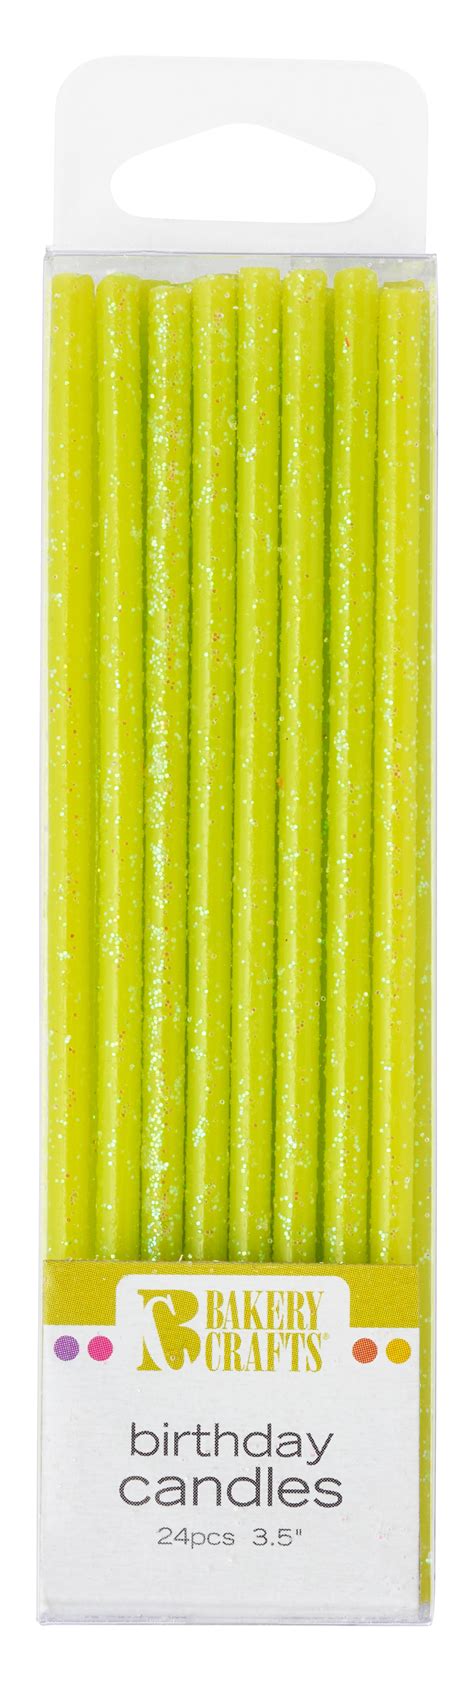 Lime Green Slim Glitter Specialty Candles Decopac